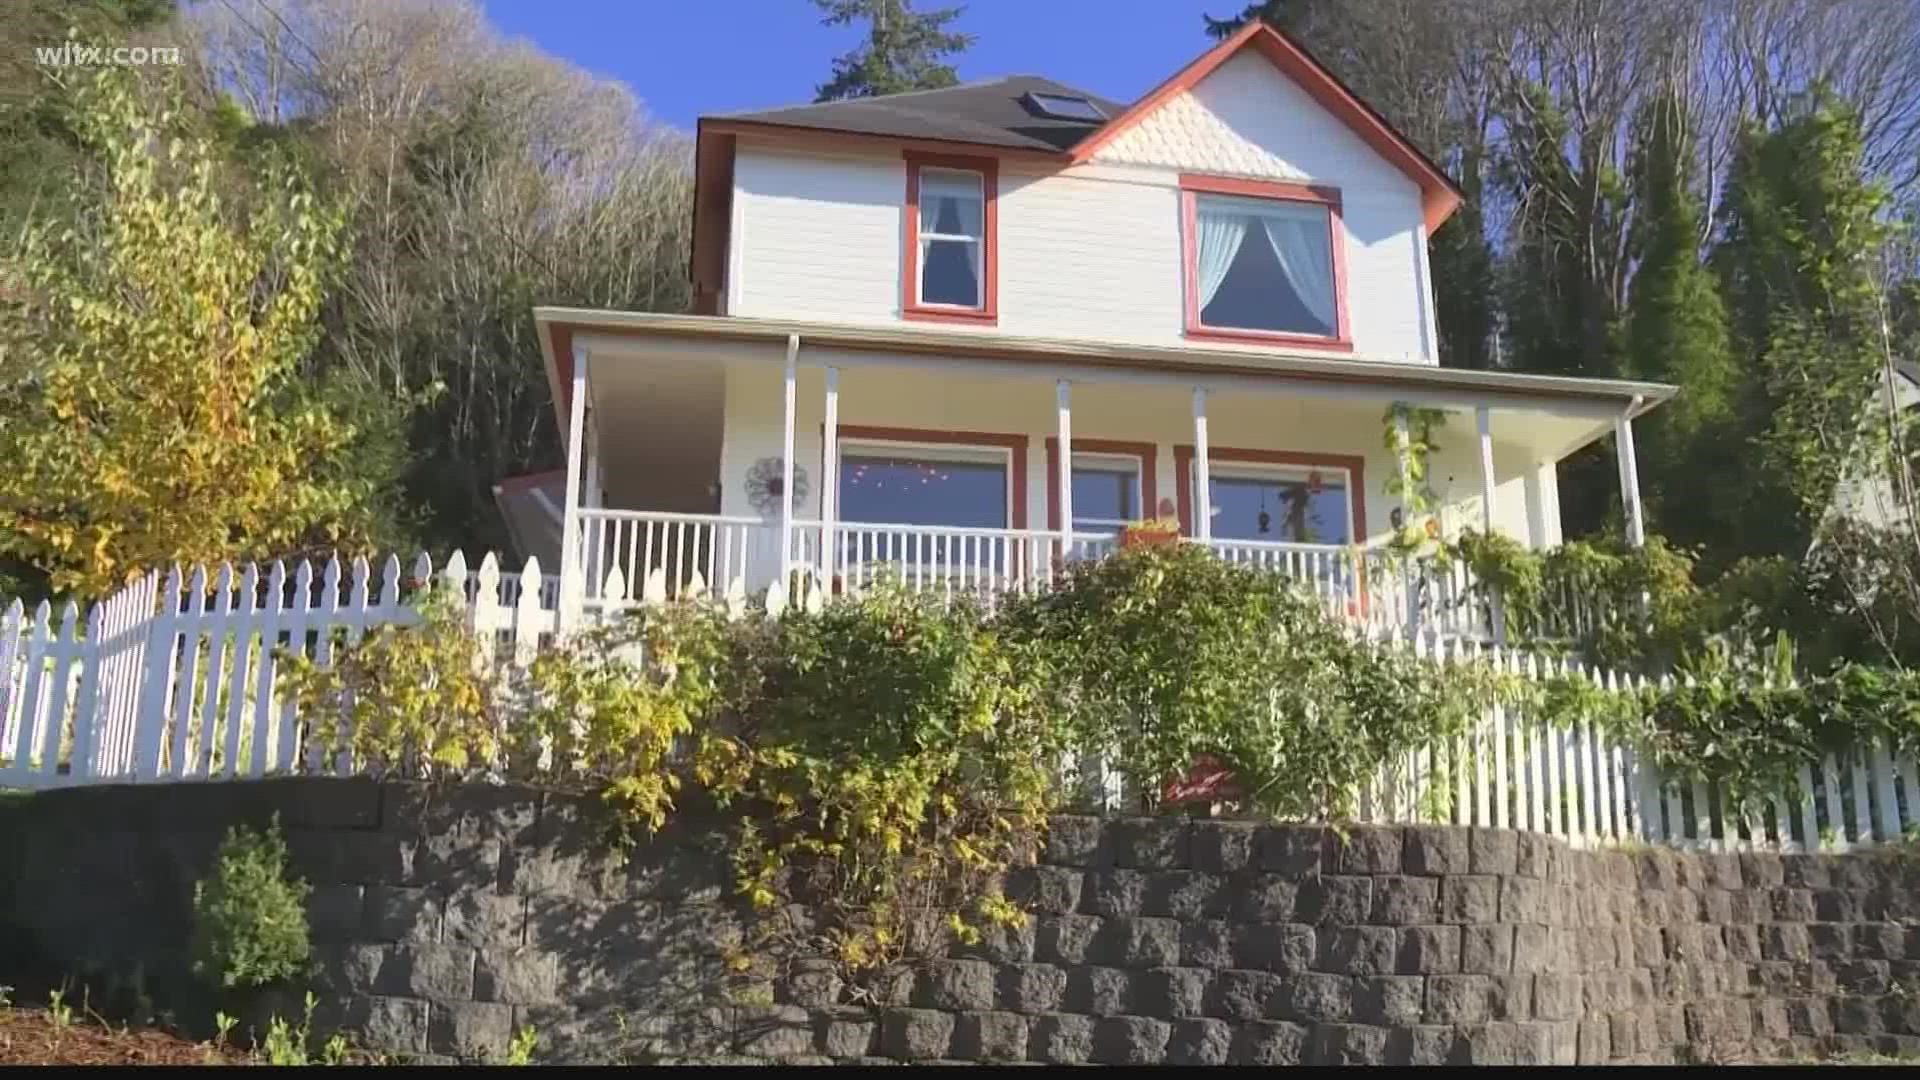 The house from the 1985 movie can be yours for just $1.6M